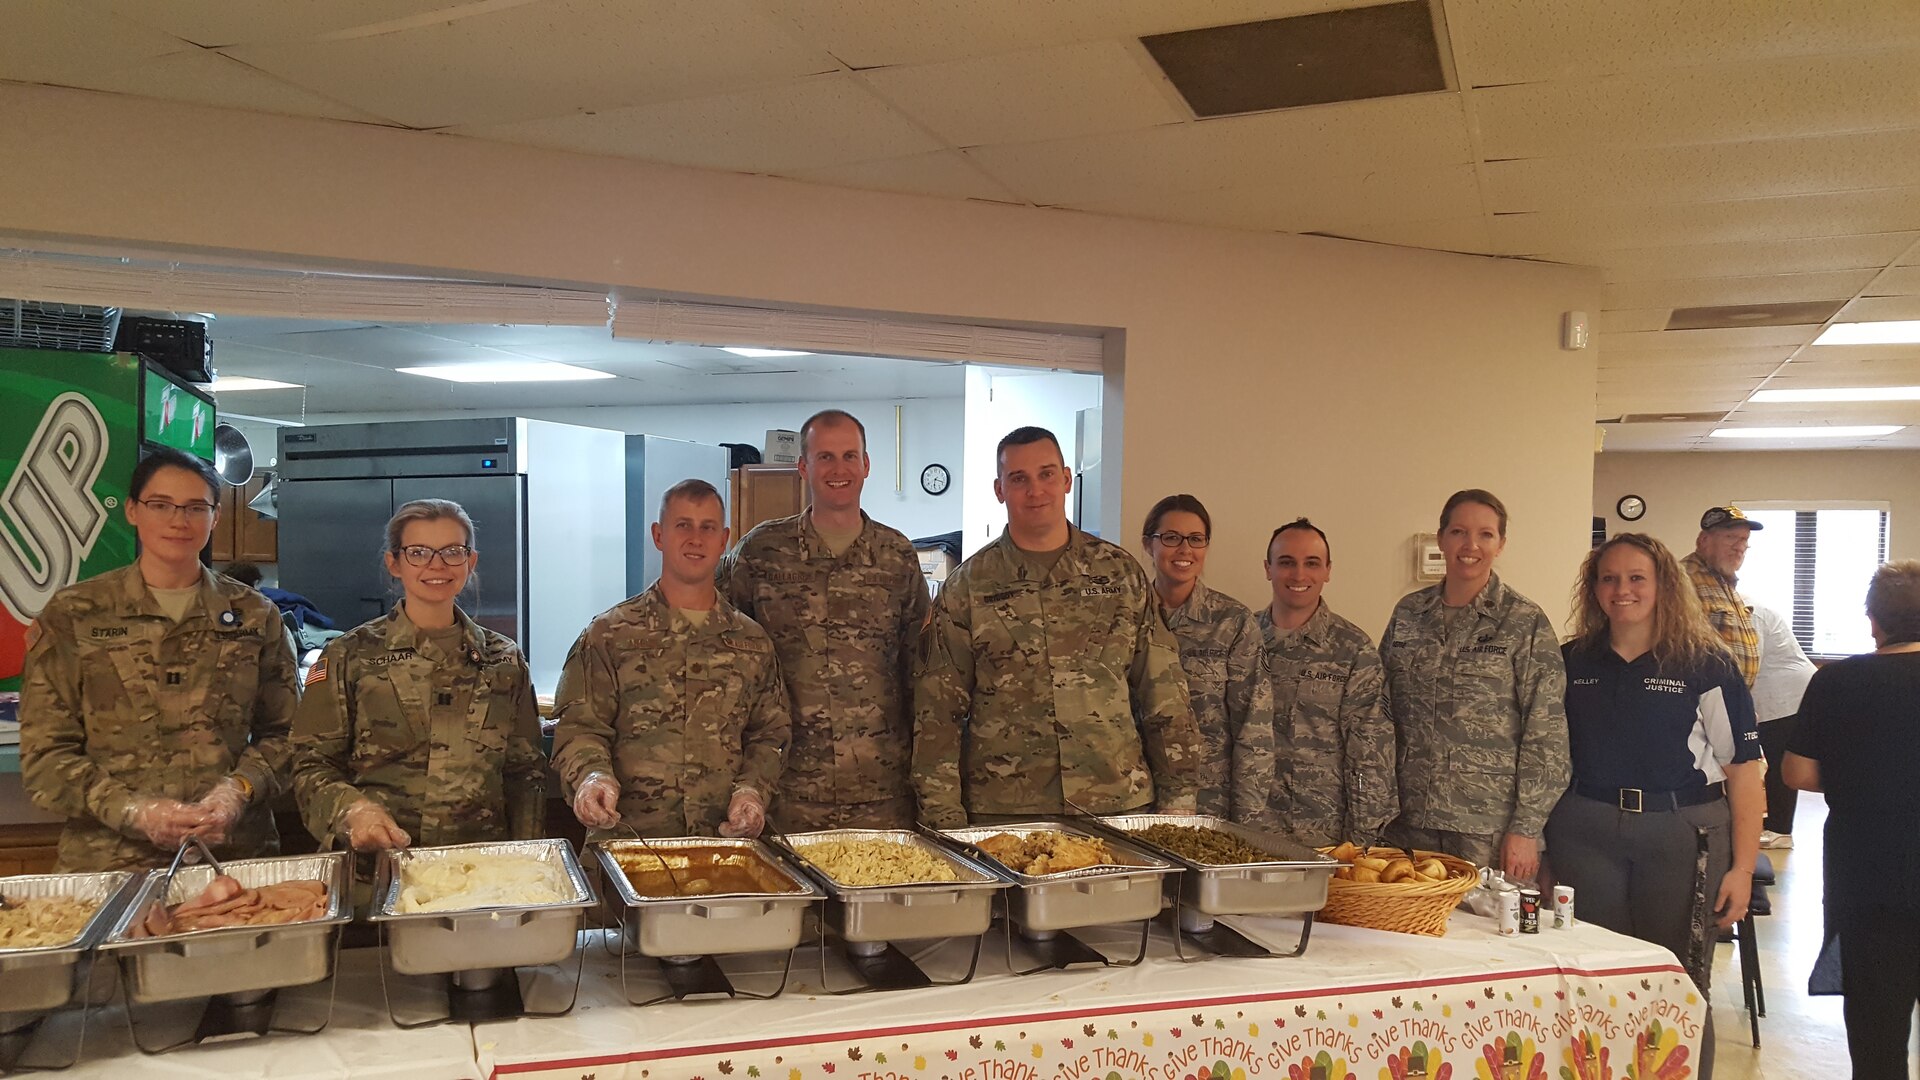 Eight uniformed military personnel and one mentee pose for a photo behind a food serving line